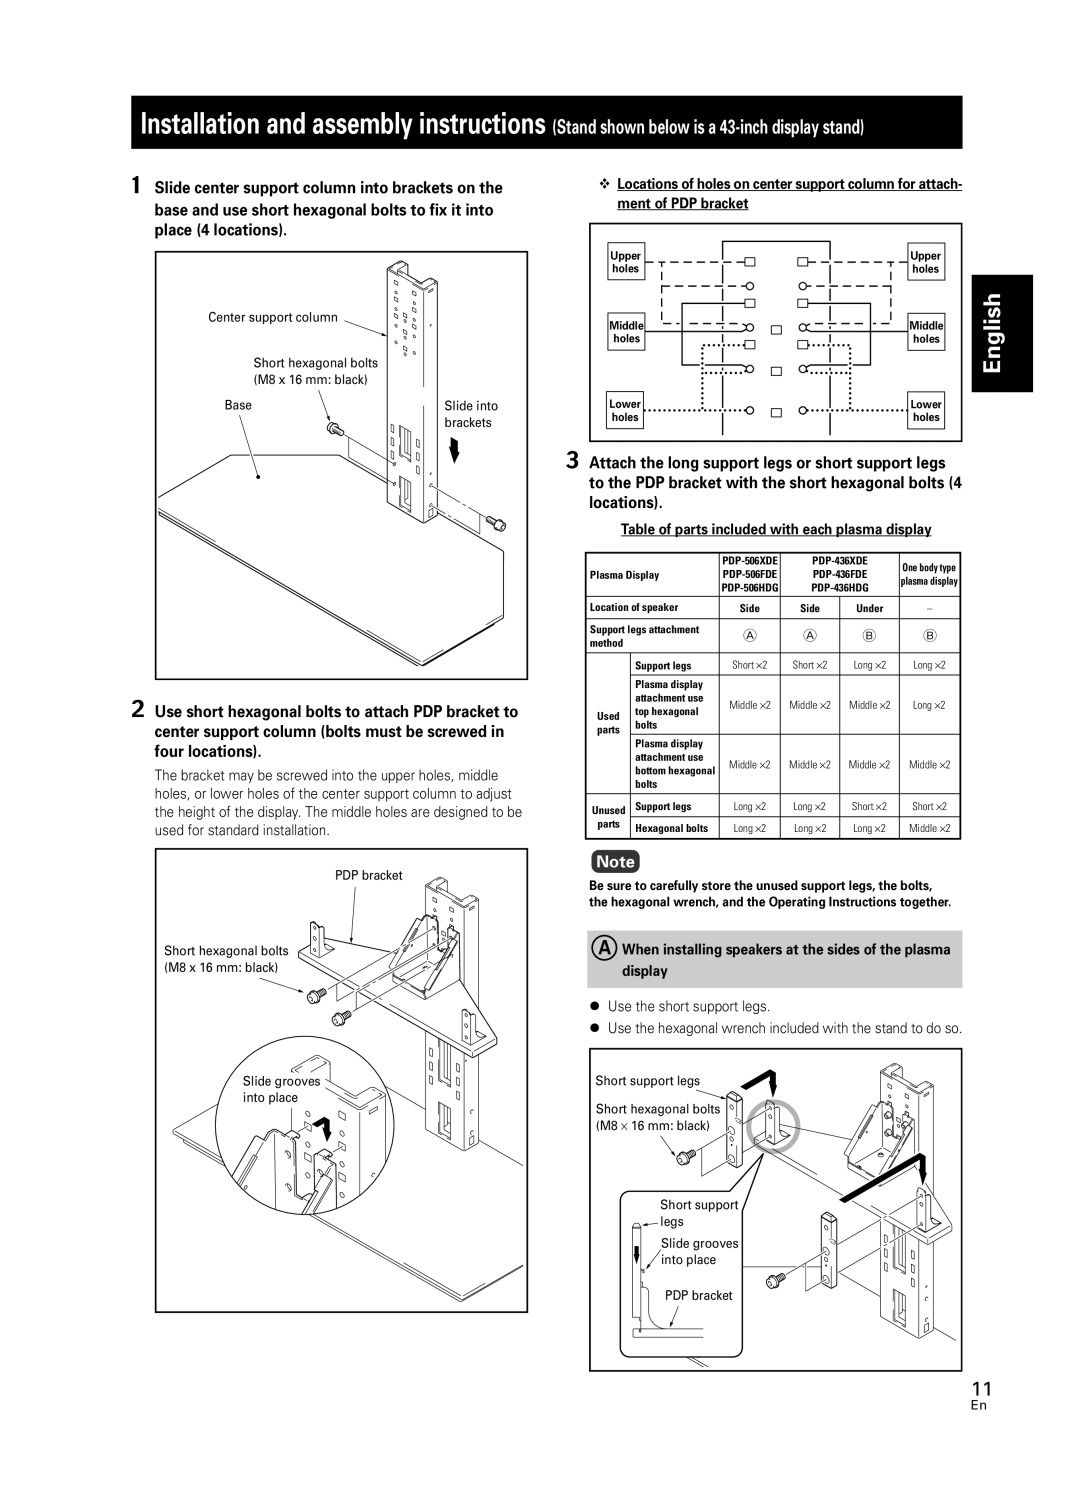 Pioneer PDK-FS05 manual English, Installation and assembly instructions, Stand shown below is a 43-inchdisplay stand 